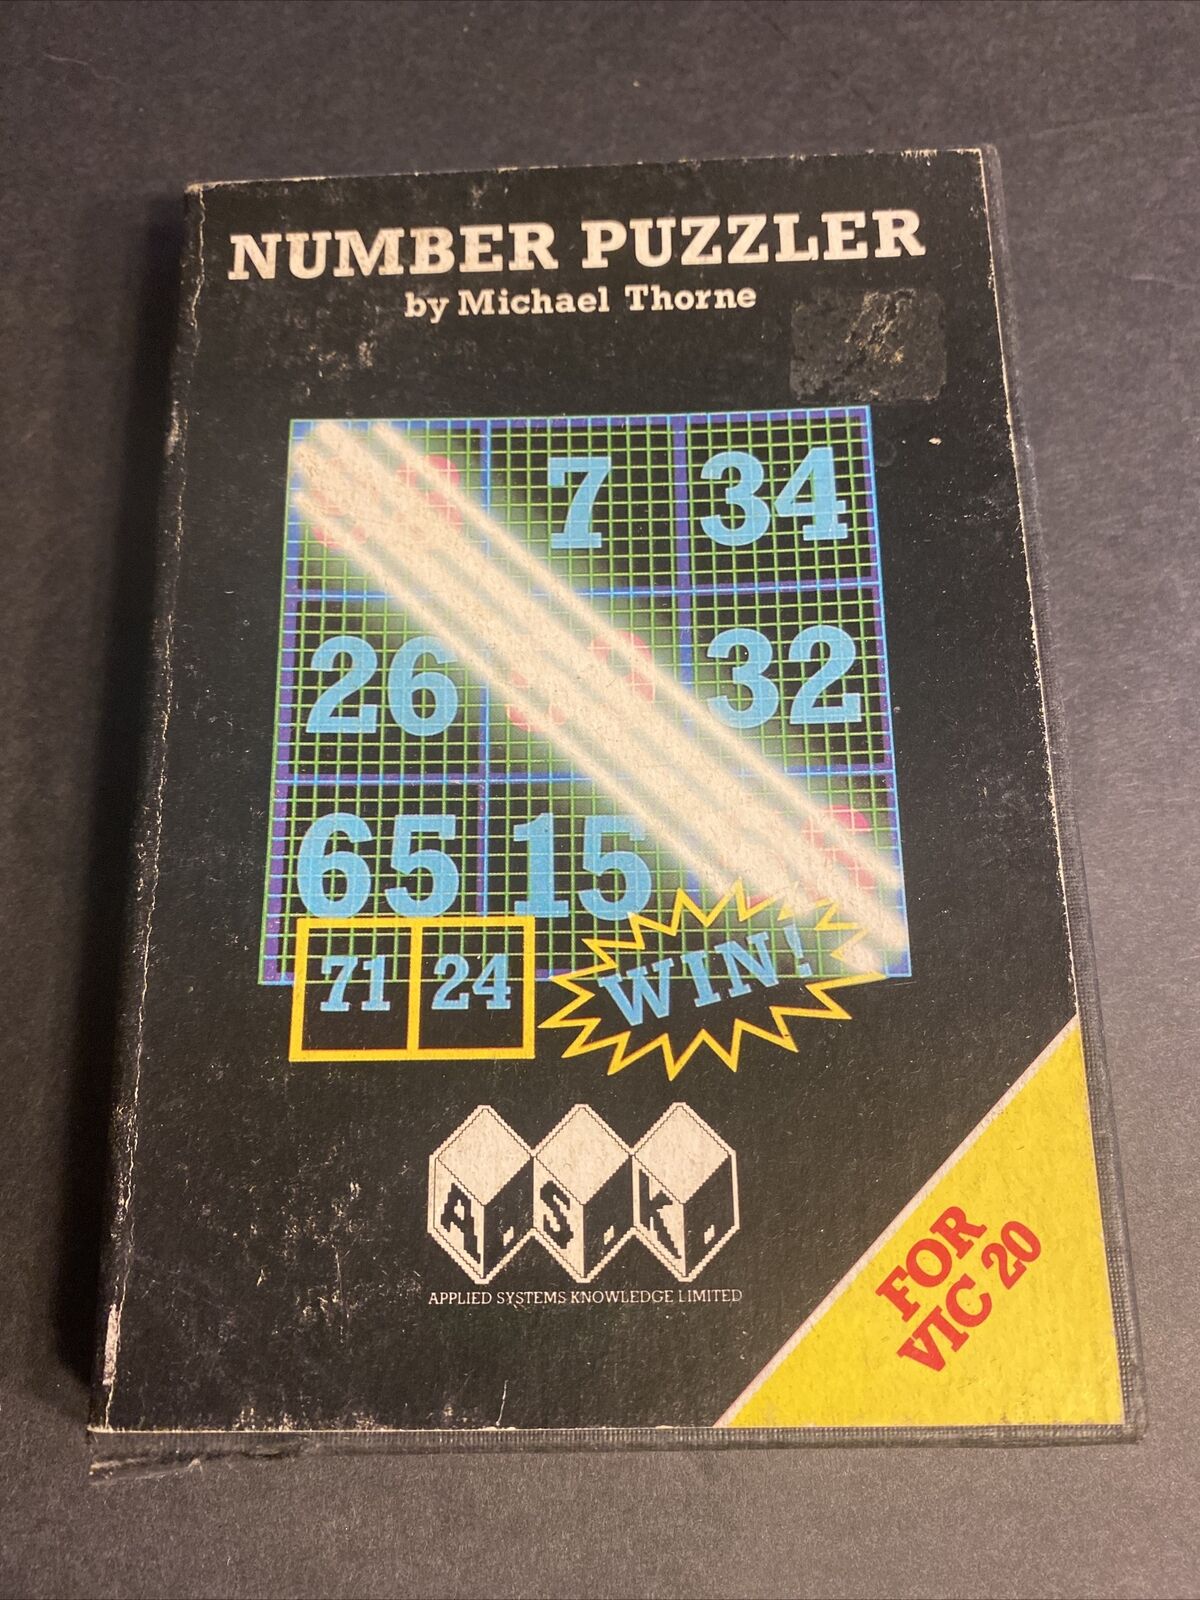 VIC-20 Number Puzzler Cassette In Case Commodore Vic 20 Game Cassette